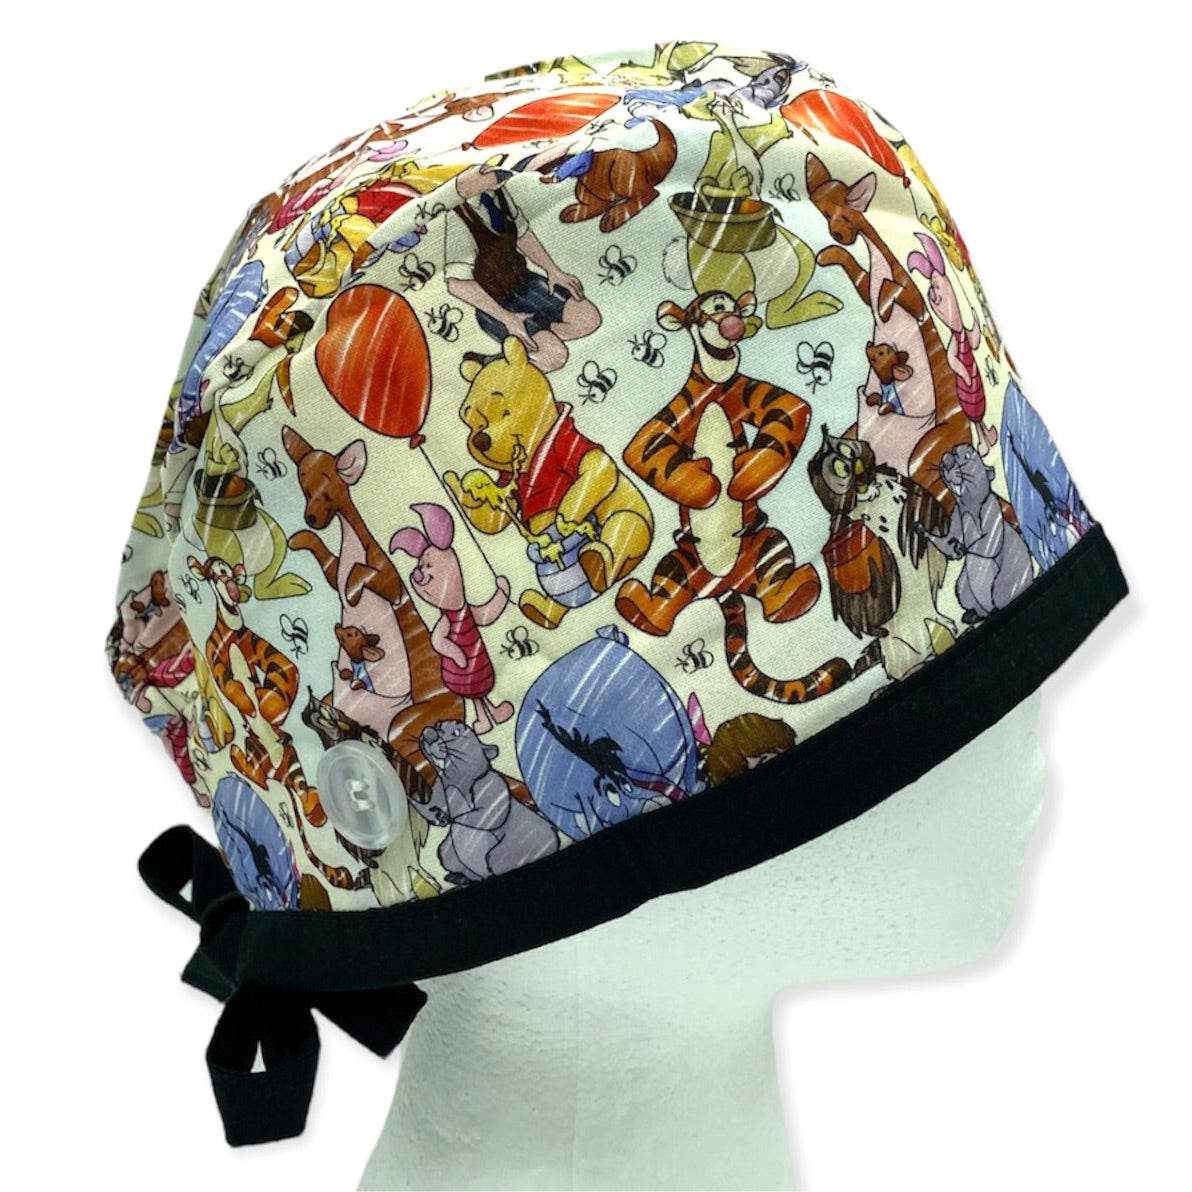 winnie the pooh disney surgical scrub cap for men and women. Scrub hat with satin lining and buttons